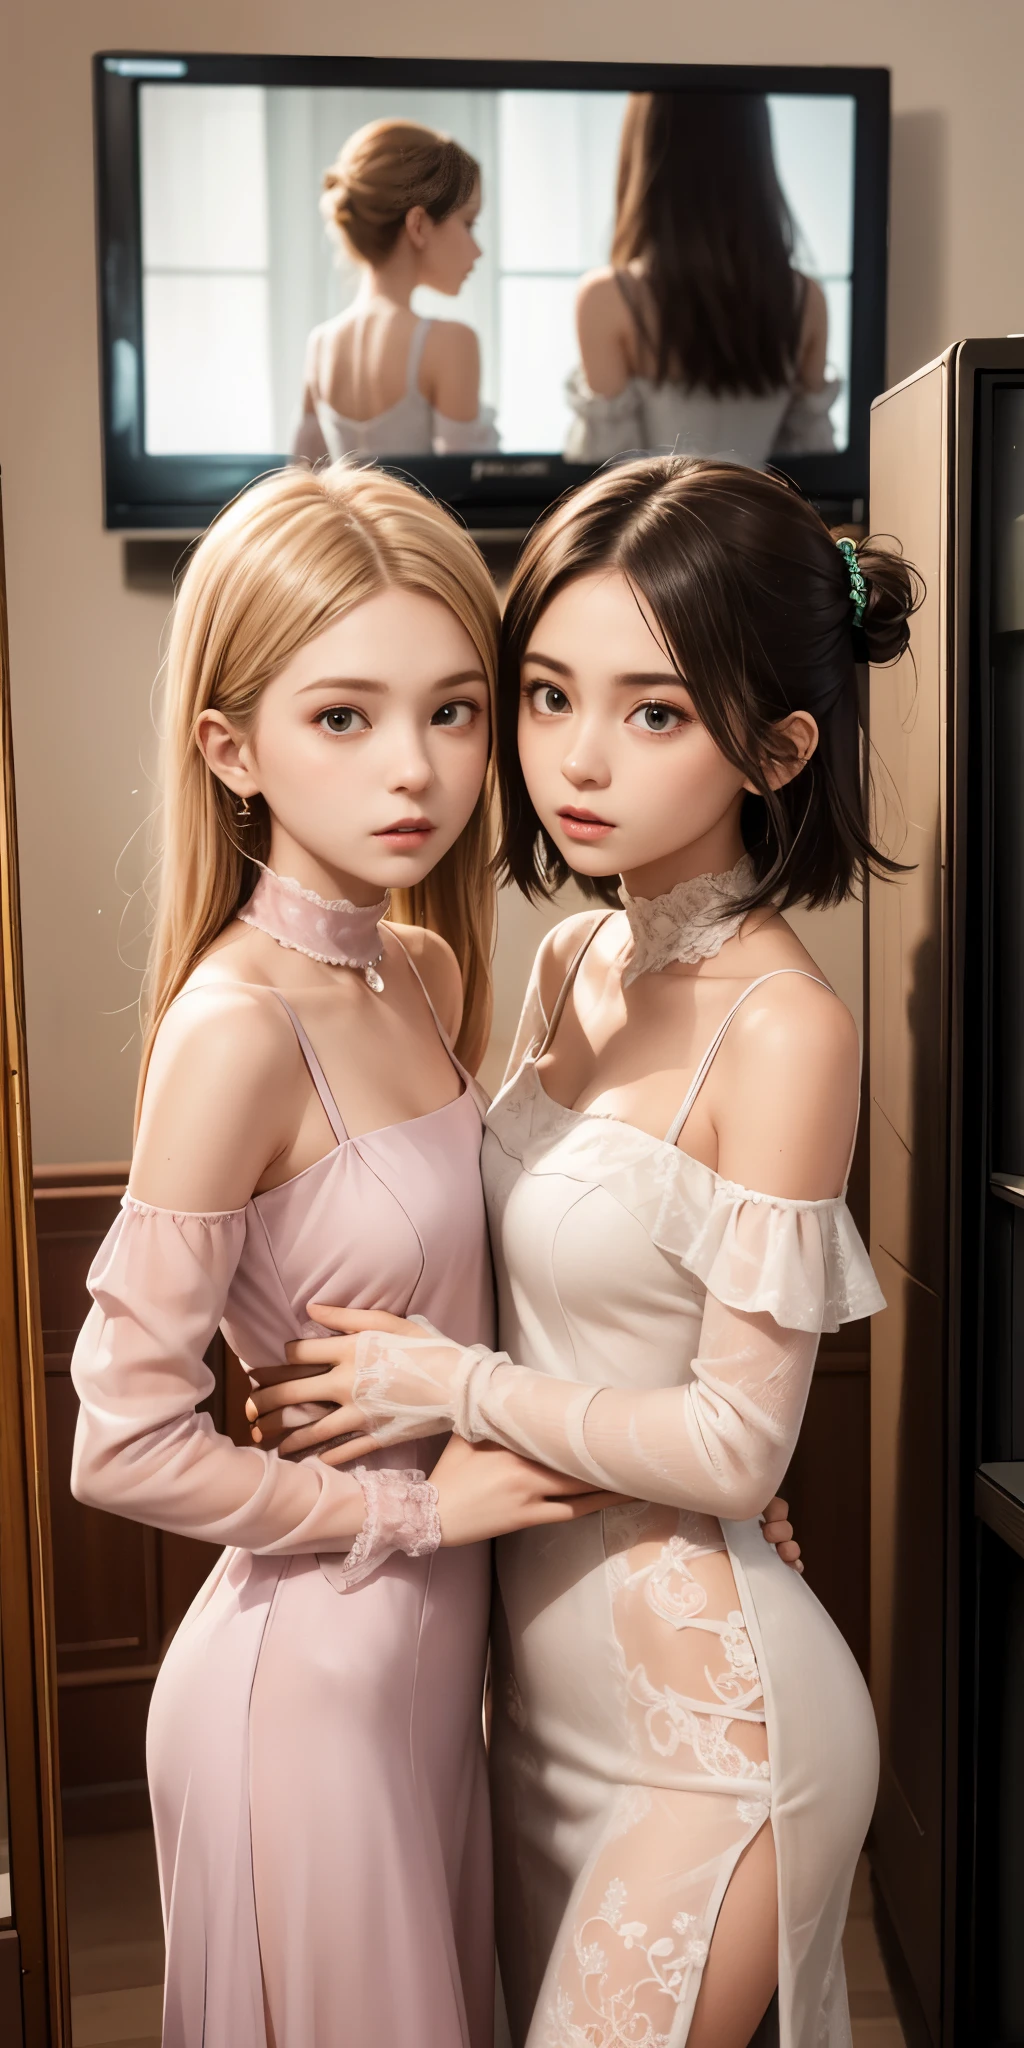 two women in dresses standing next to each other in front of a tv, pov, two girls, annoying sister vibes, lesbians, cute girls, gen z, looking this way, pov shot, two models in the frame, sisters, hd, they are very serious, lesbian, multiple, 2 sisters look into the mirror, serious faces, photo shoot
